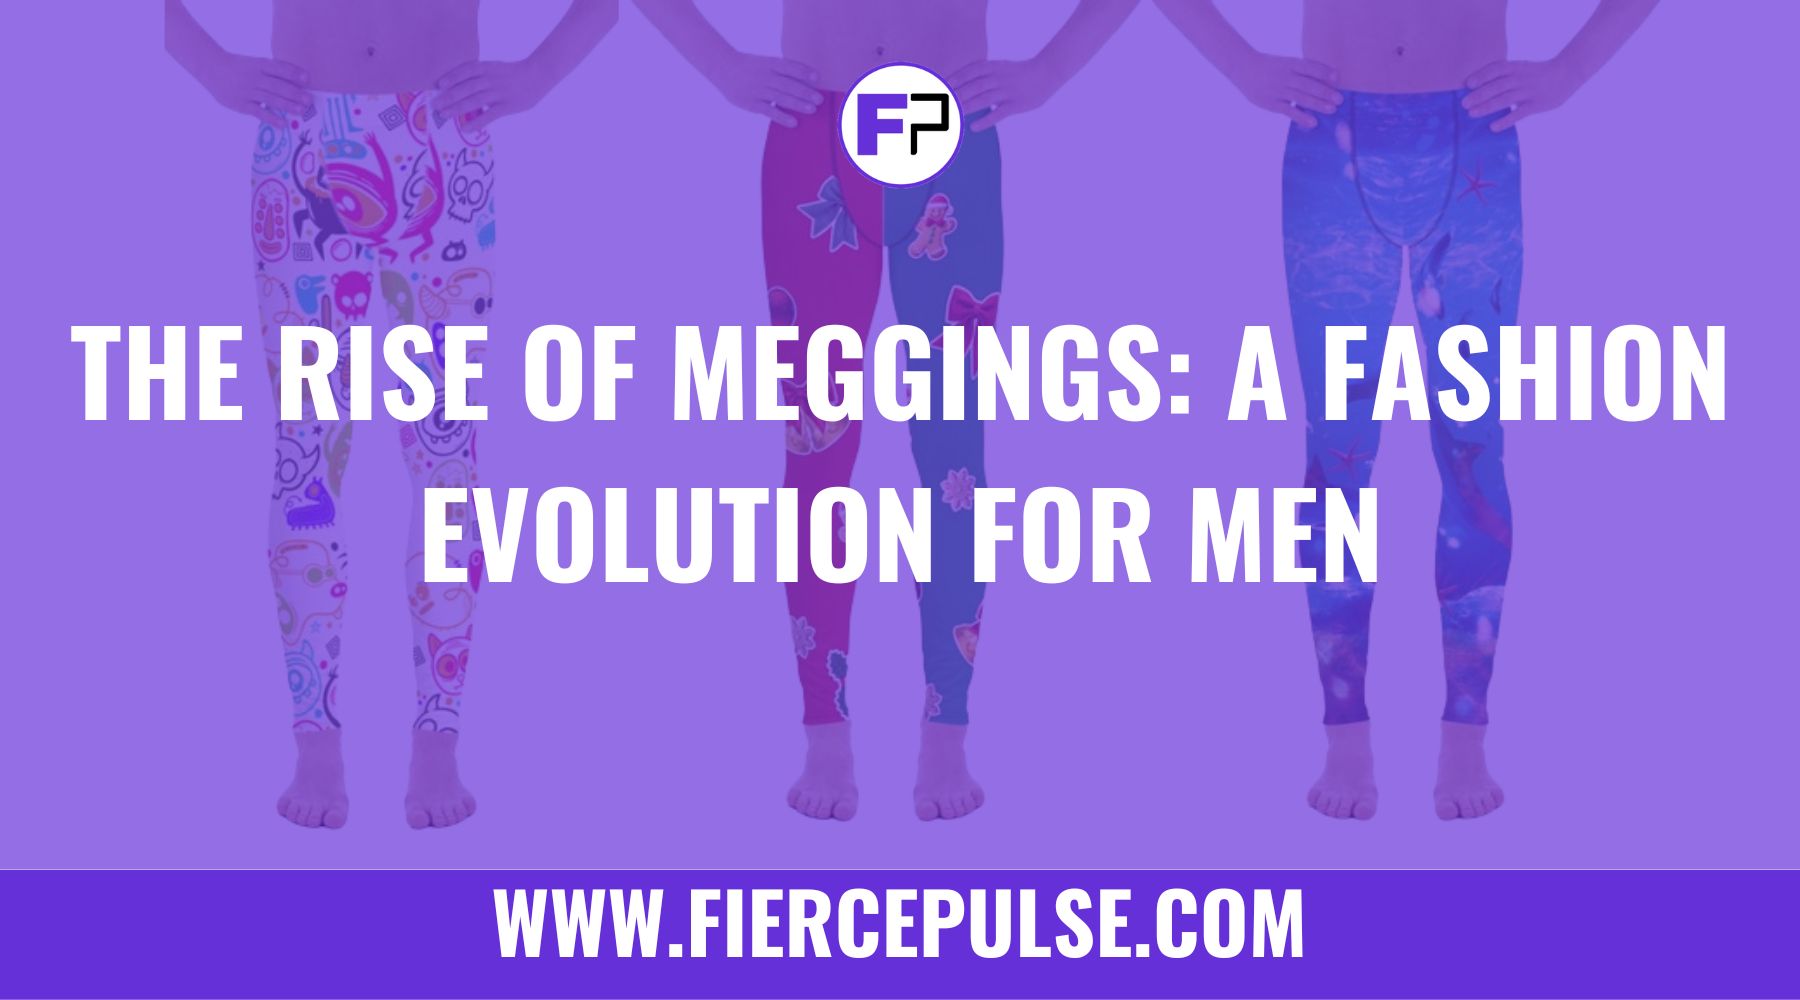 The Rise of Meggings: A Fashion Evolution for Men